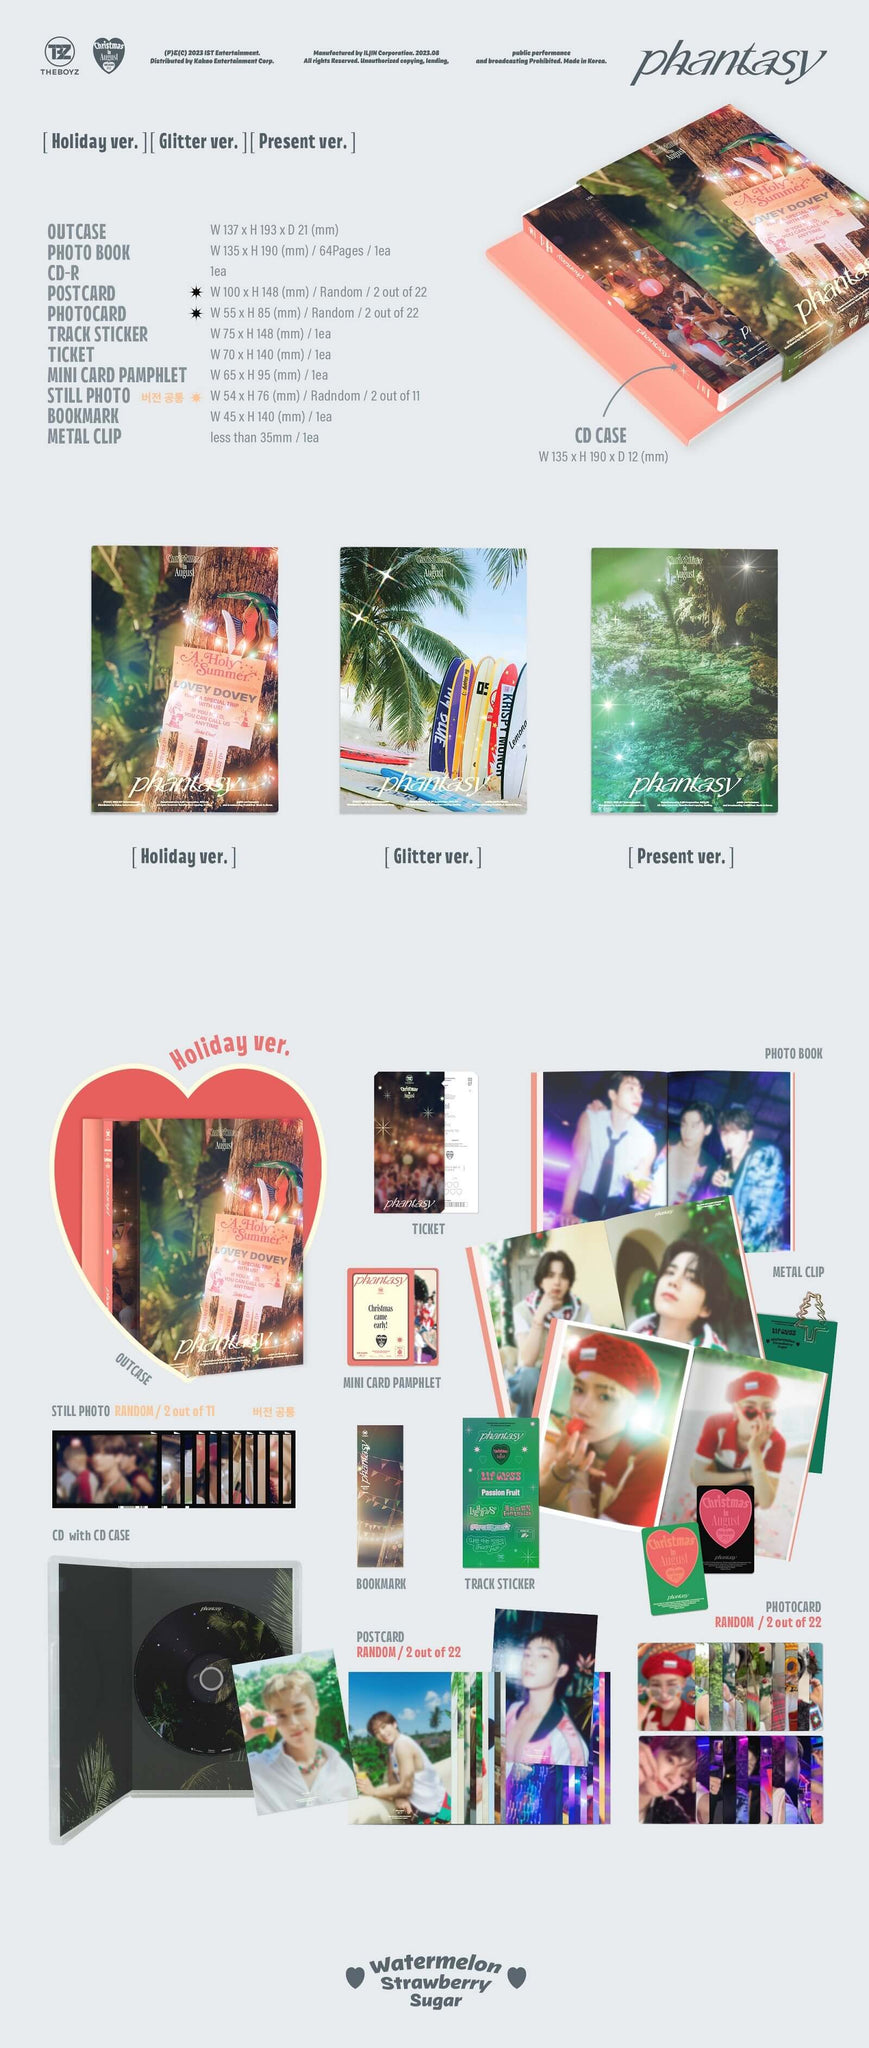  THE BOYZ PHANTASY Pt.1 Christmas In August - Holiday Version Inclusions Out Case CD Still Photos Photocards Ticket Mini Card Pamphlet Bookmark Photobook Track Sticker Postcard Metal Clip